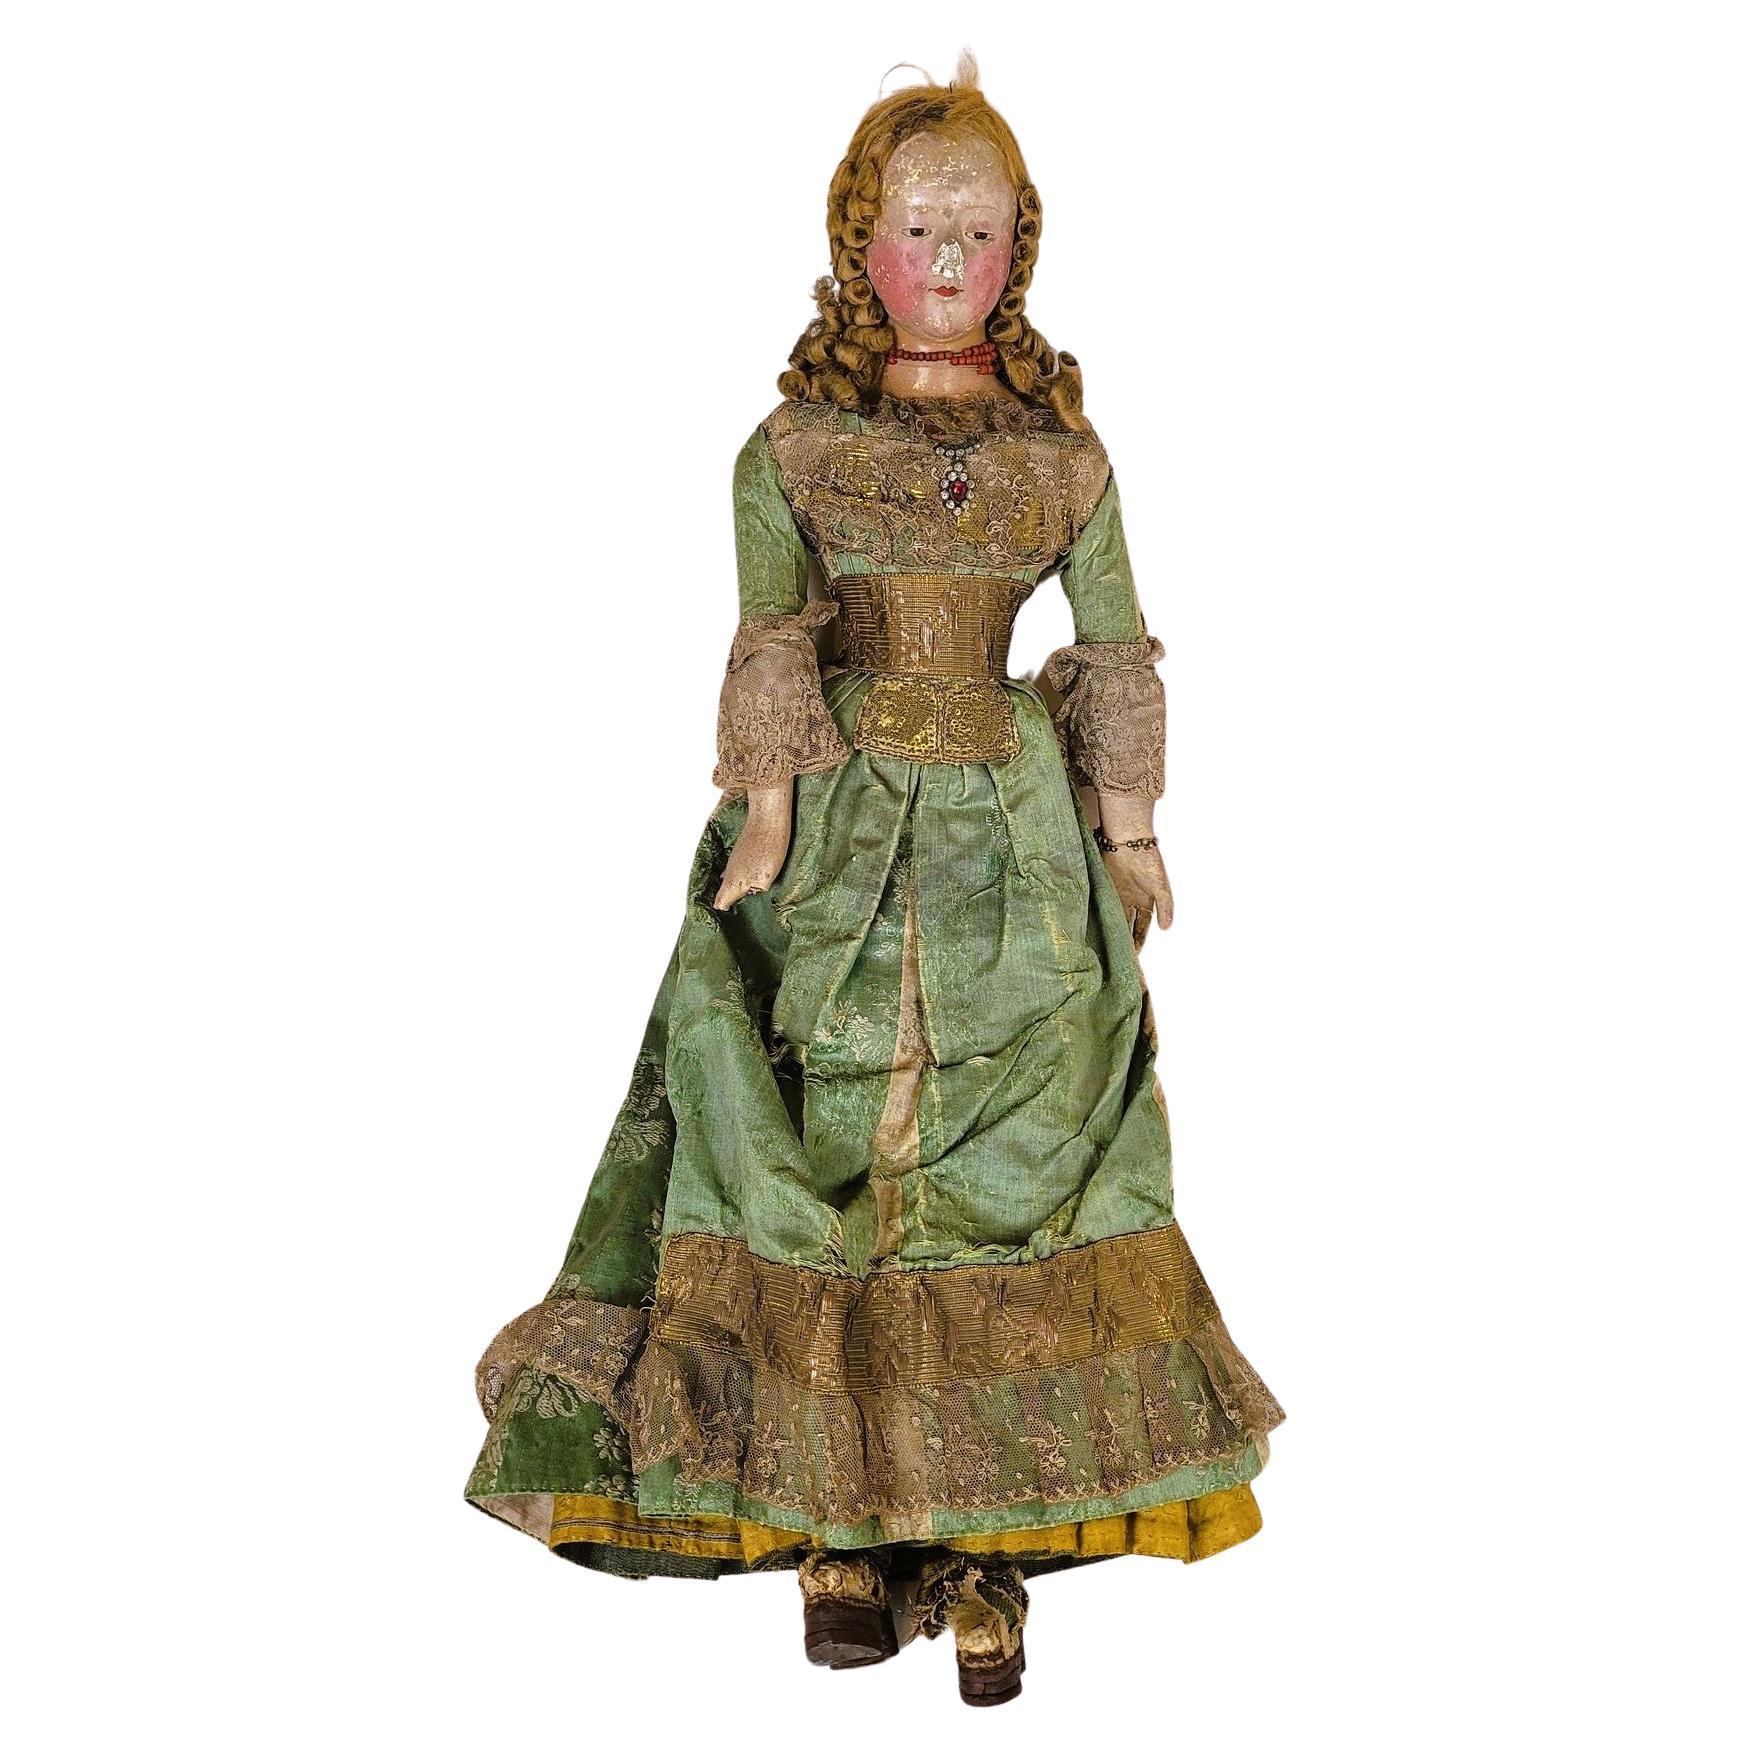 Articulated Doll, 18th Century